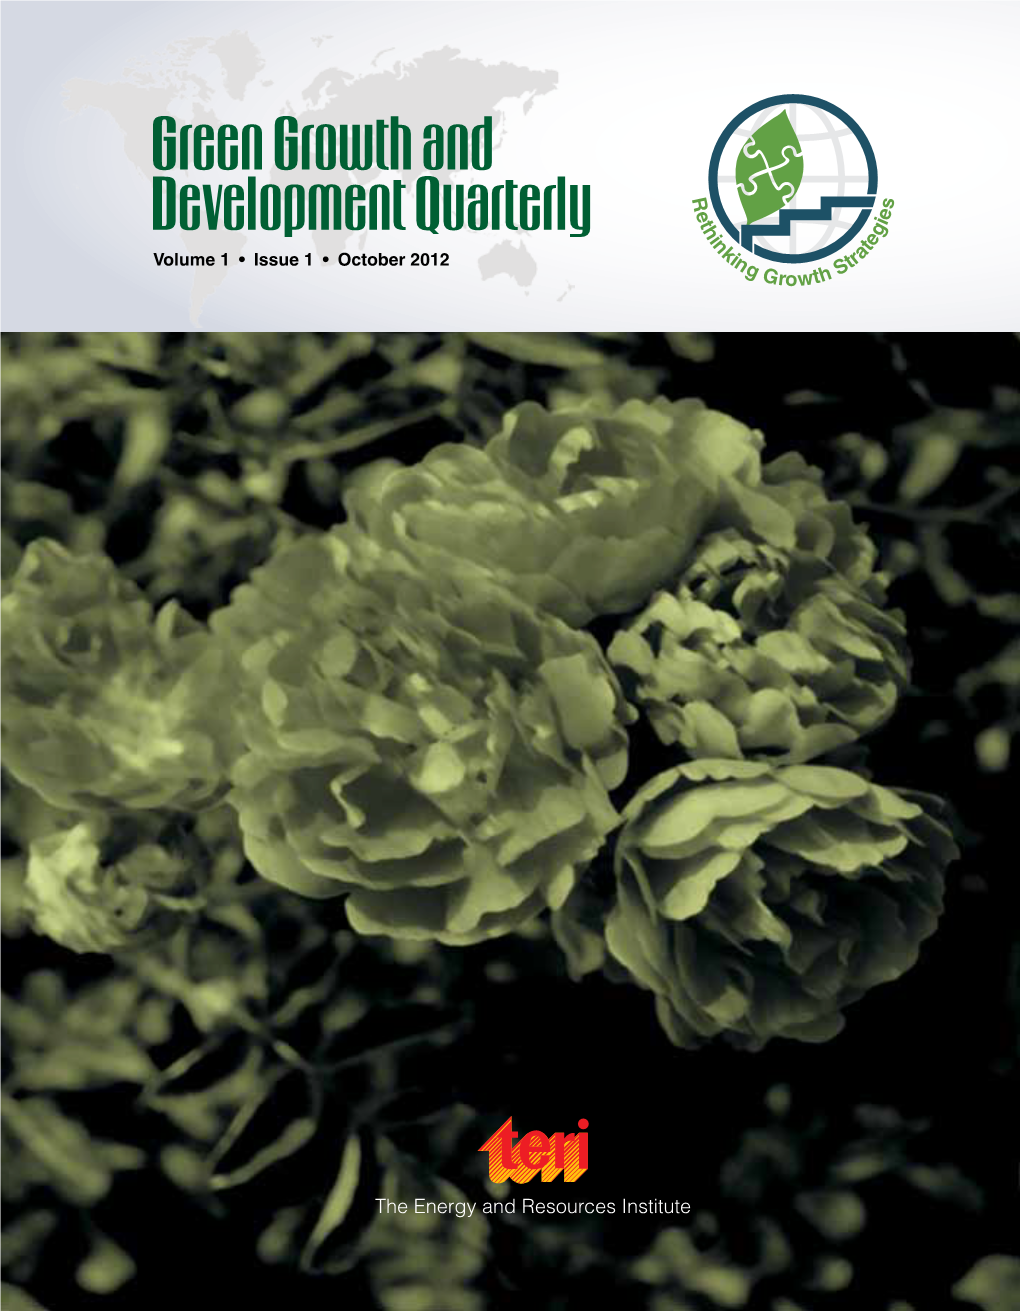 Green Growth and Development Quarterly Volume 1 • Issue 1 • October 2012